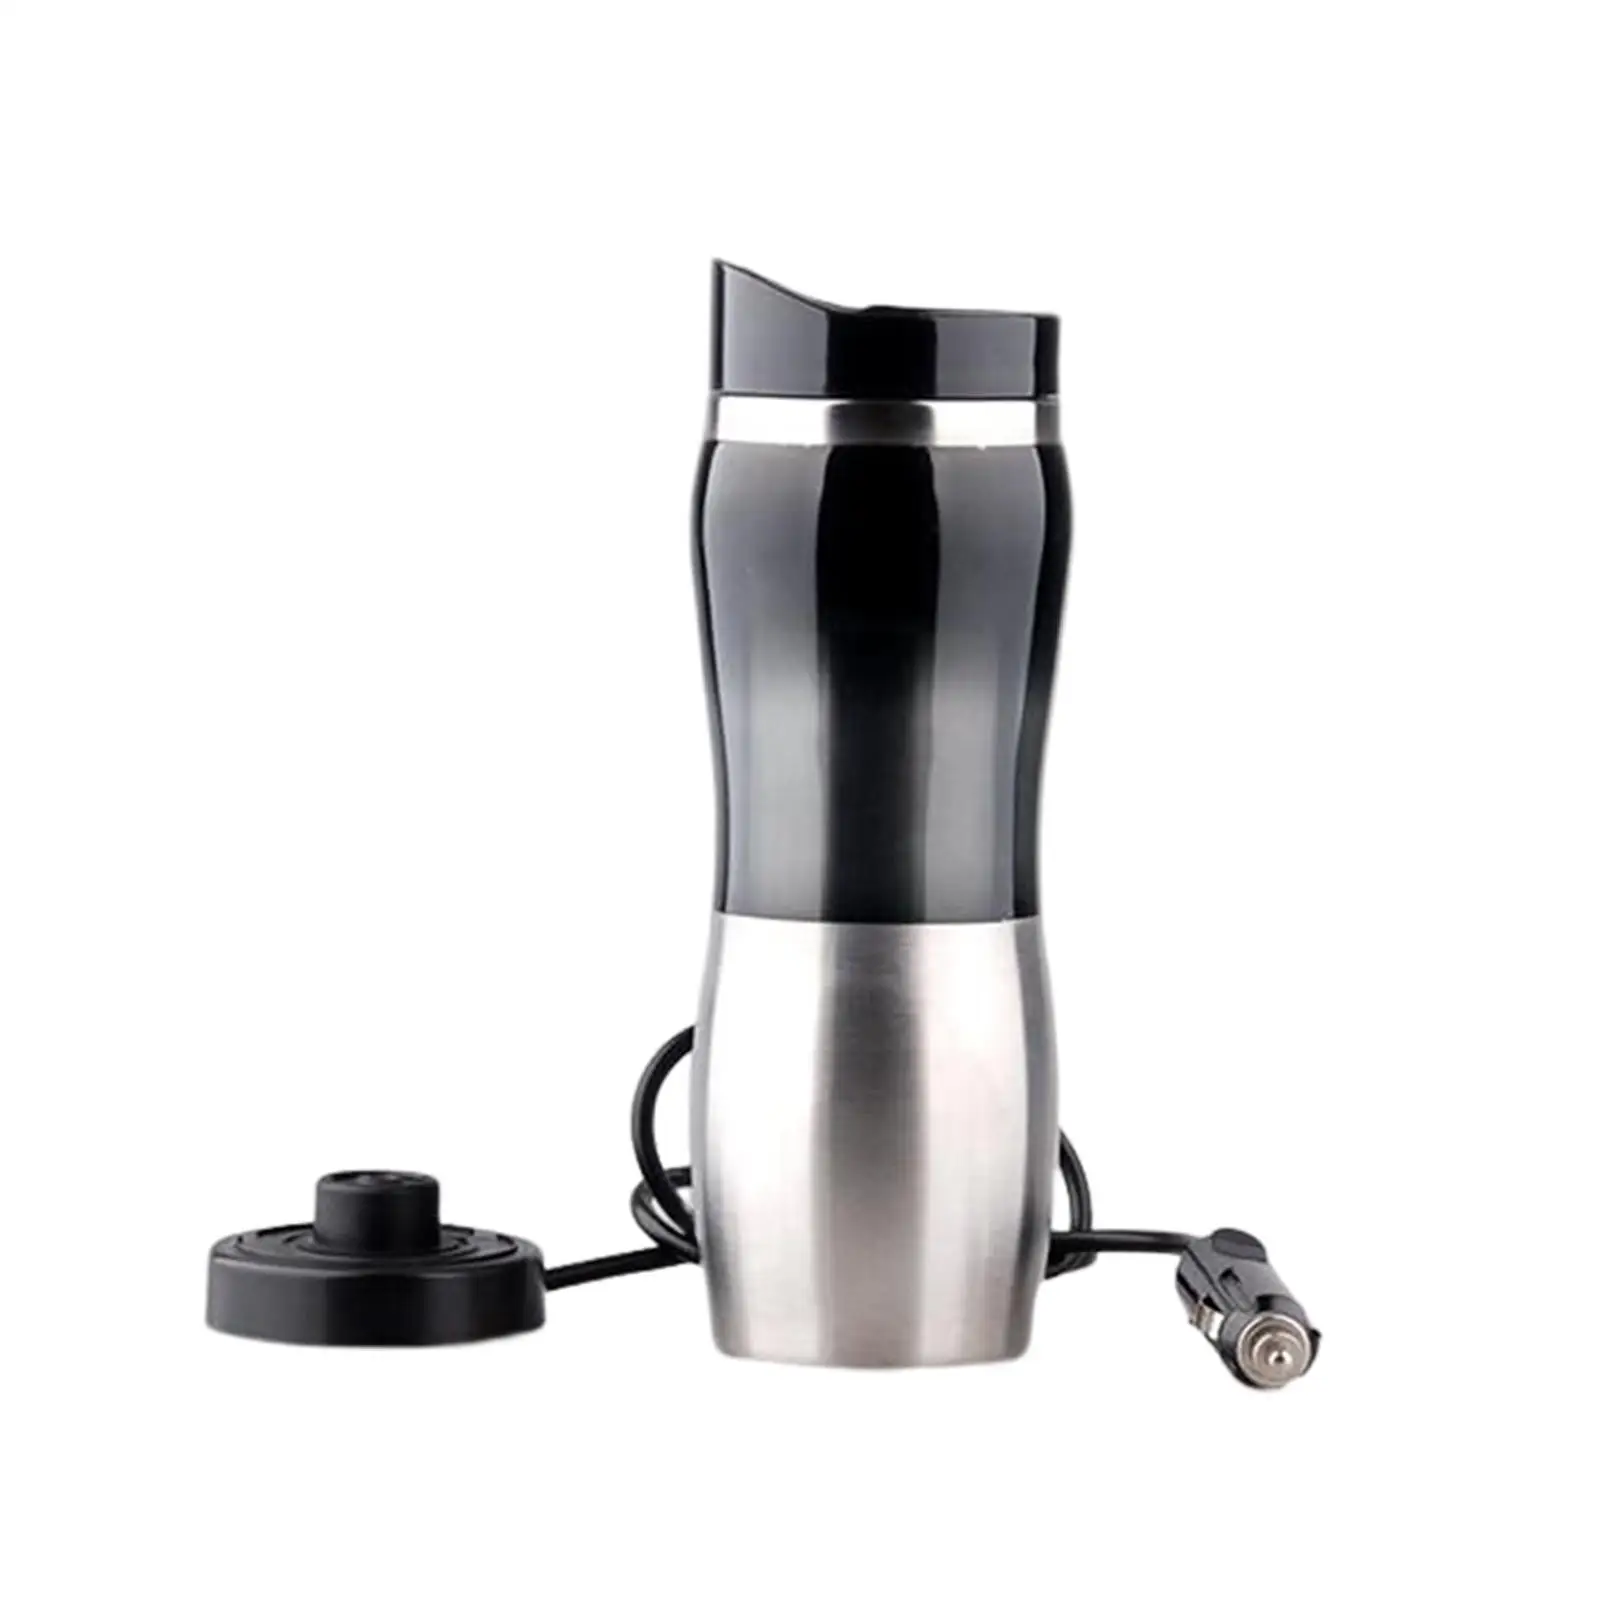  Kettle /12V/ 400ml/  Stainless Steel/ Mug/ Travel /Heating Cup/ Car  for Tea  Eggs Camping Boat